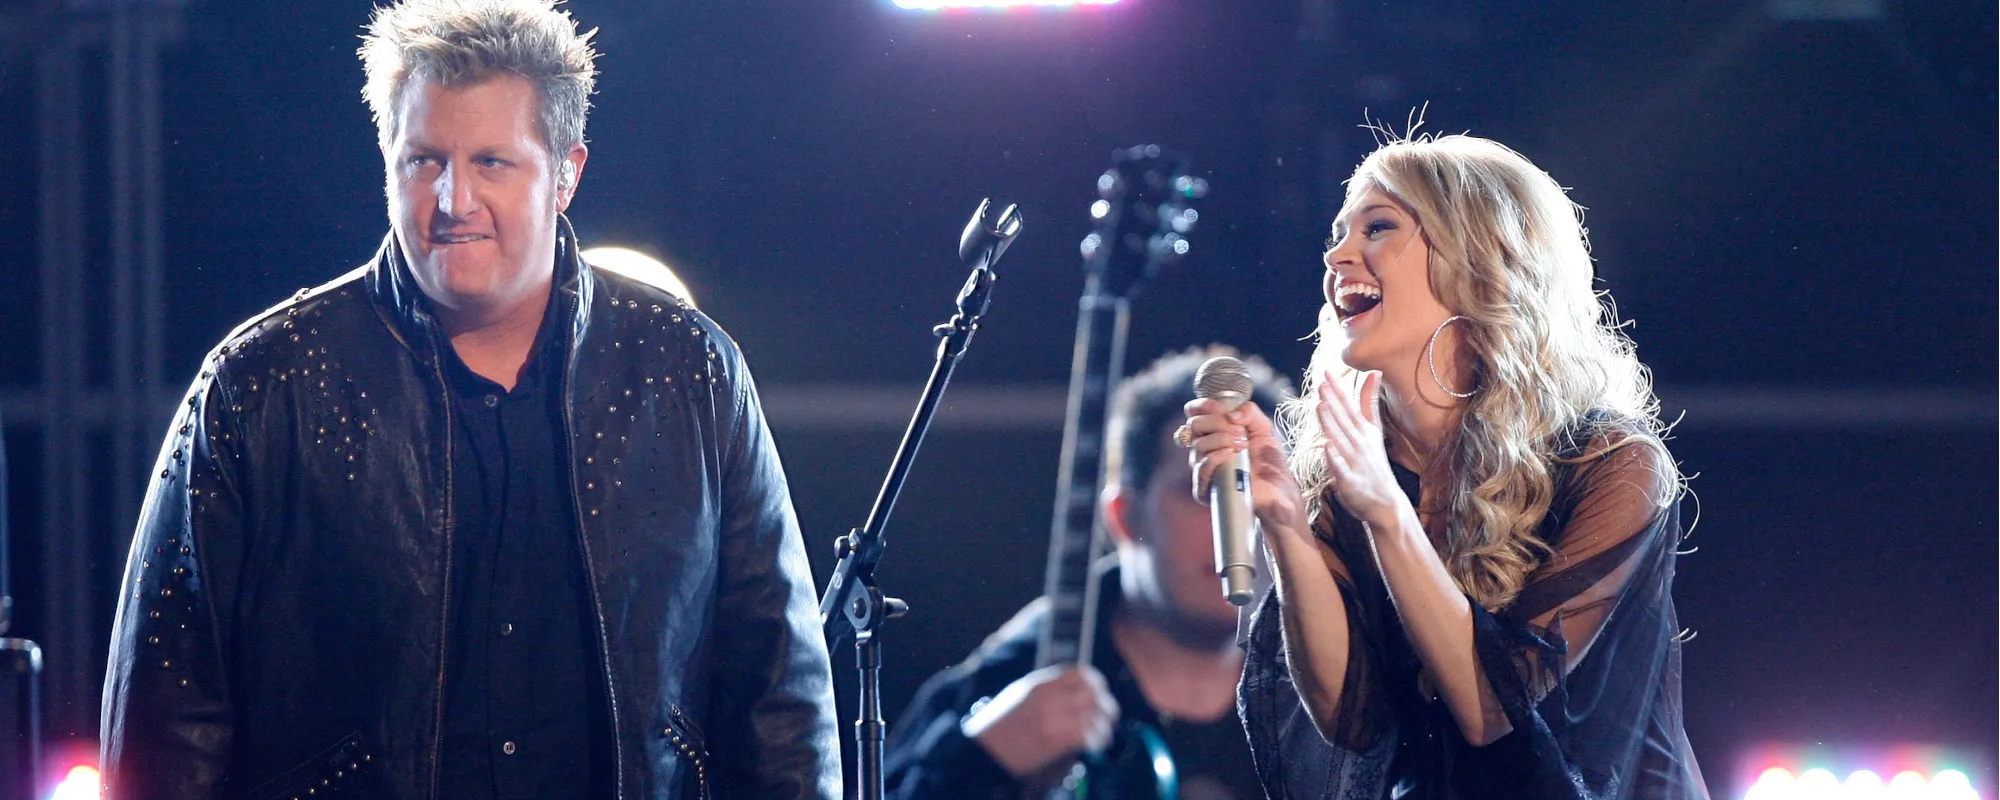 Gary LeVox ‘Had To Share’ Throwback Photo With Carrie Underwood